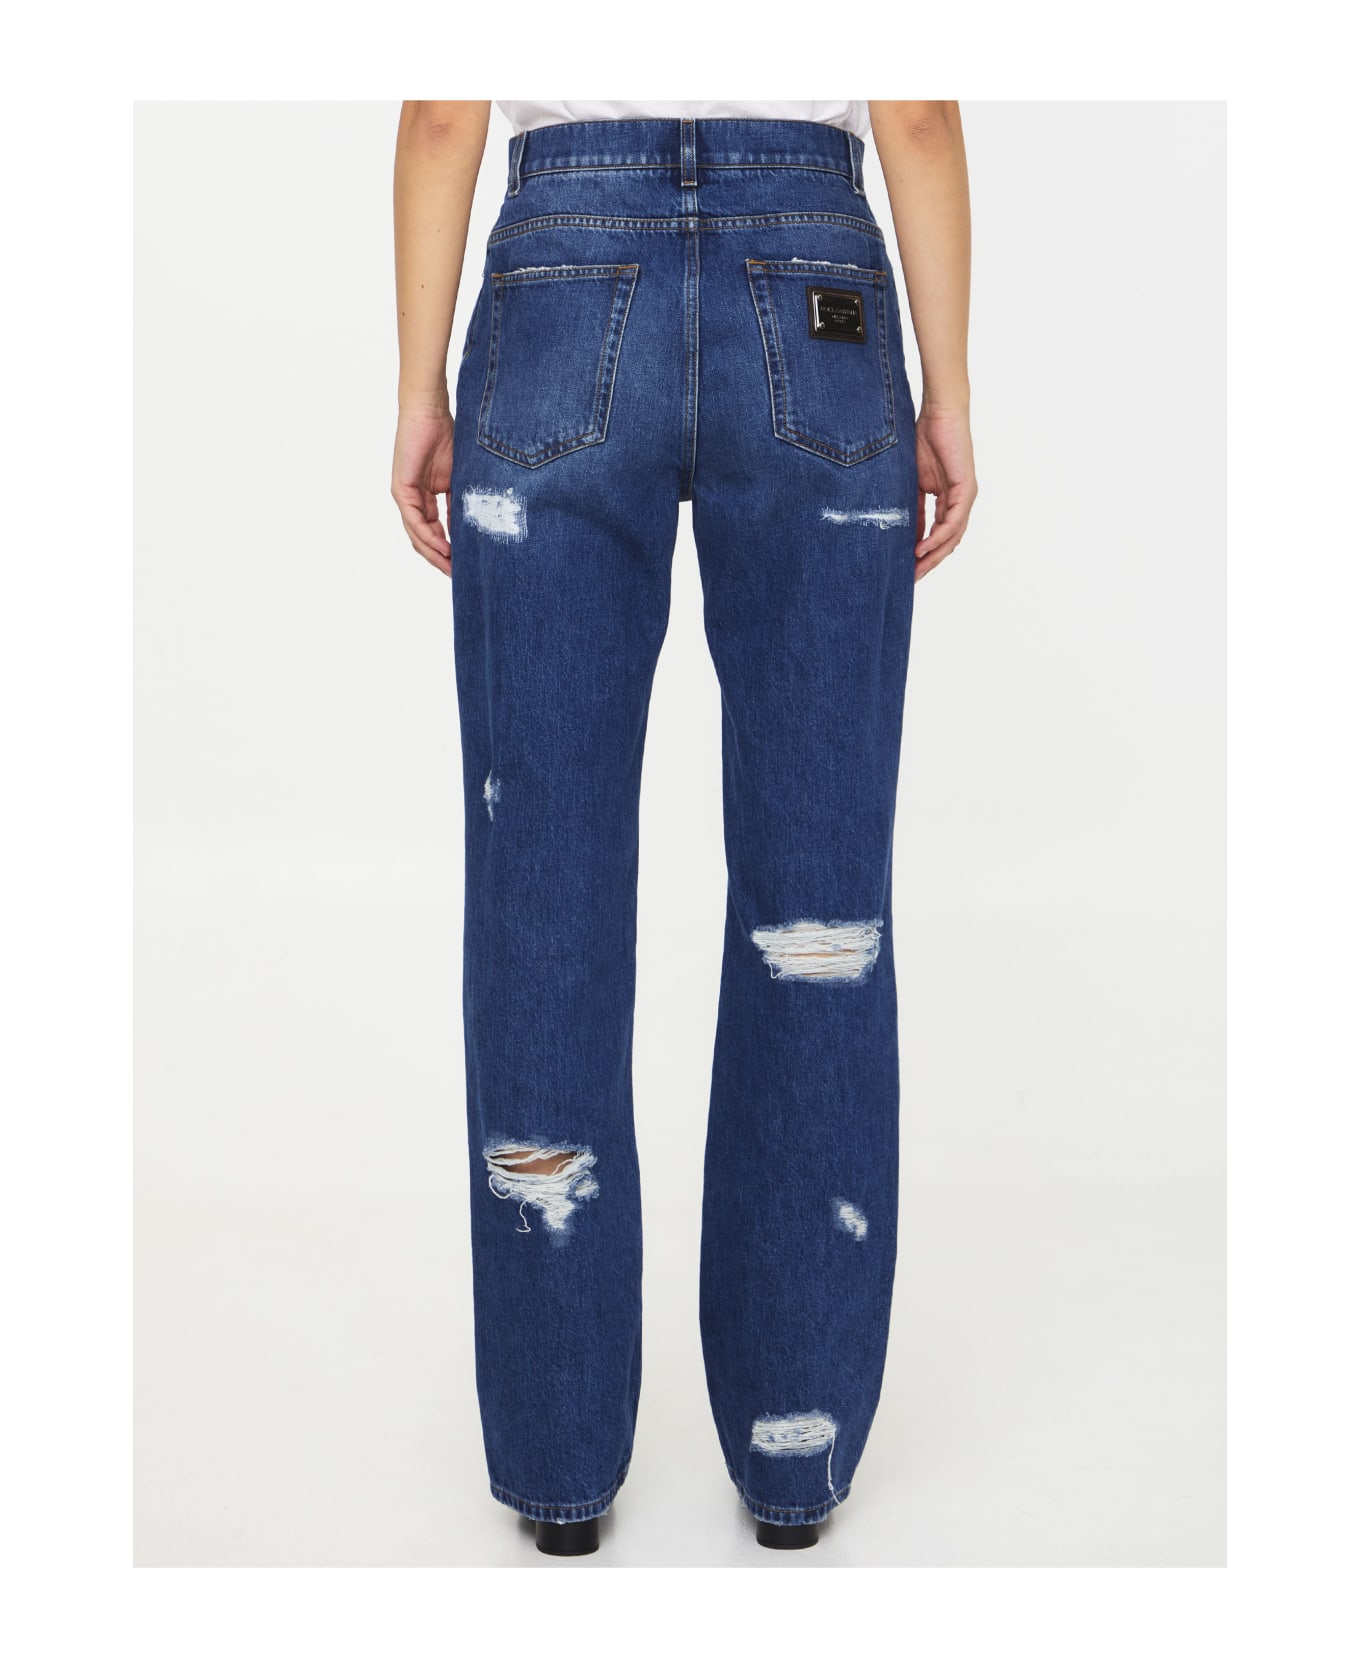 Dolce & Gabbana Distressed Jeans With Leo Print - LIGHT BLUE